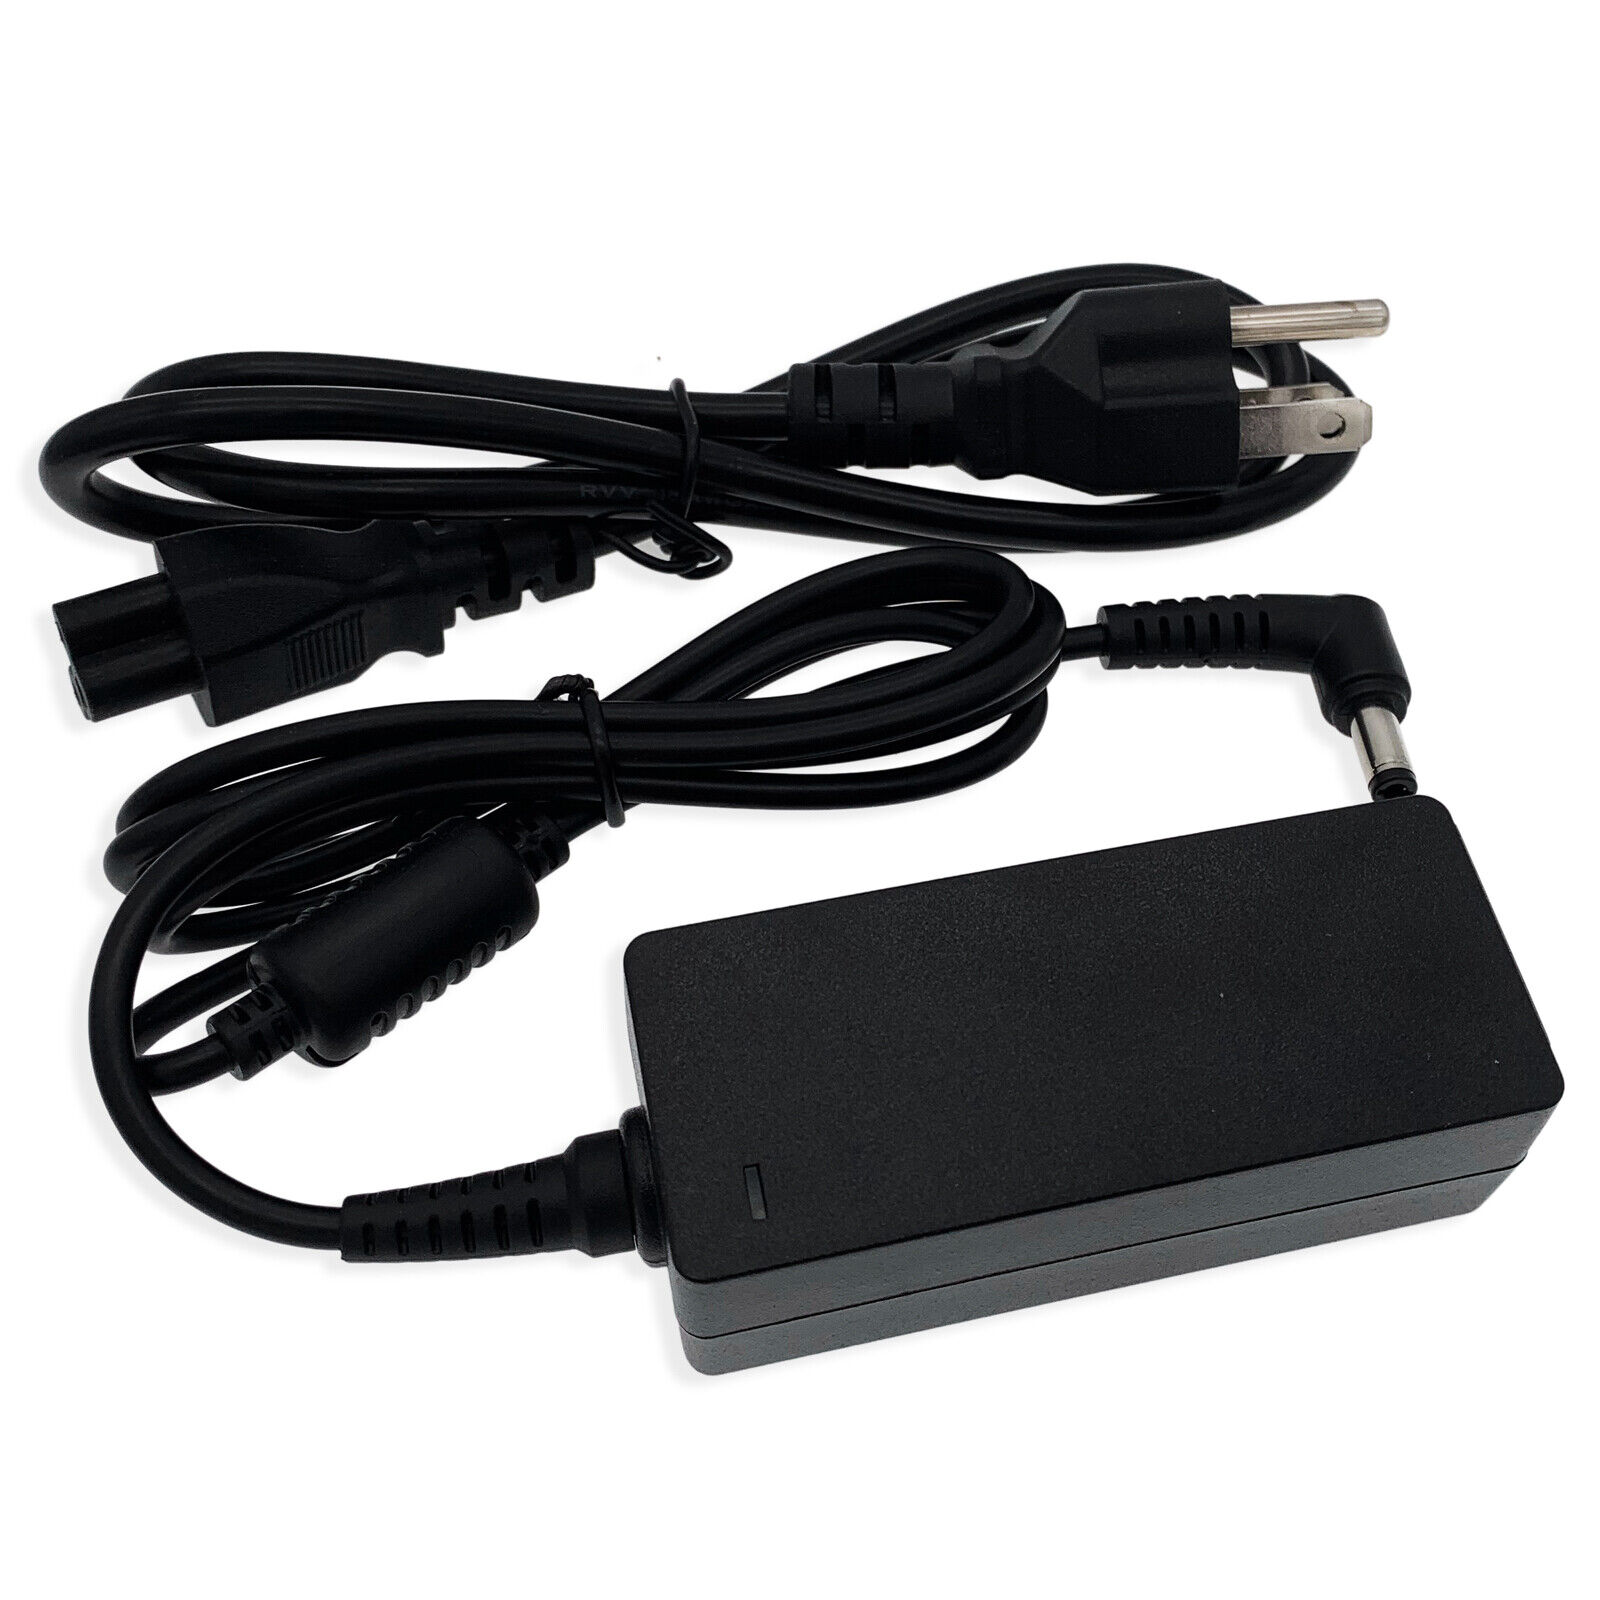 24V AC Adapter Charger for Kupa Mani-Pro ManiPro Passport Nail File Drill This product is good for the following Models